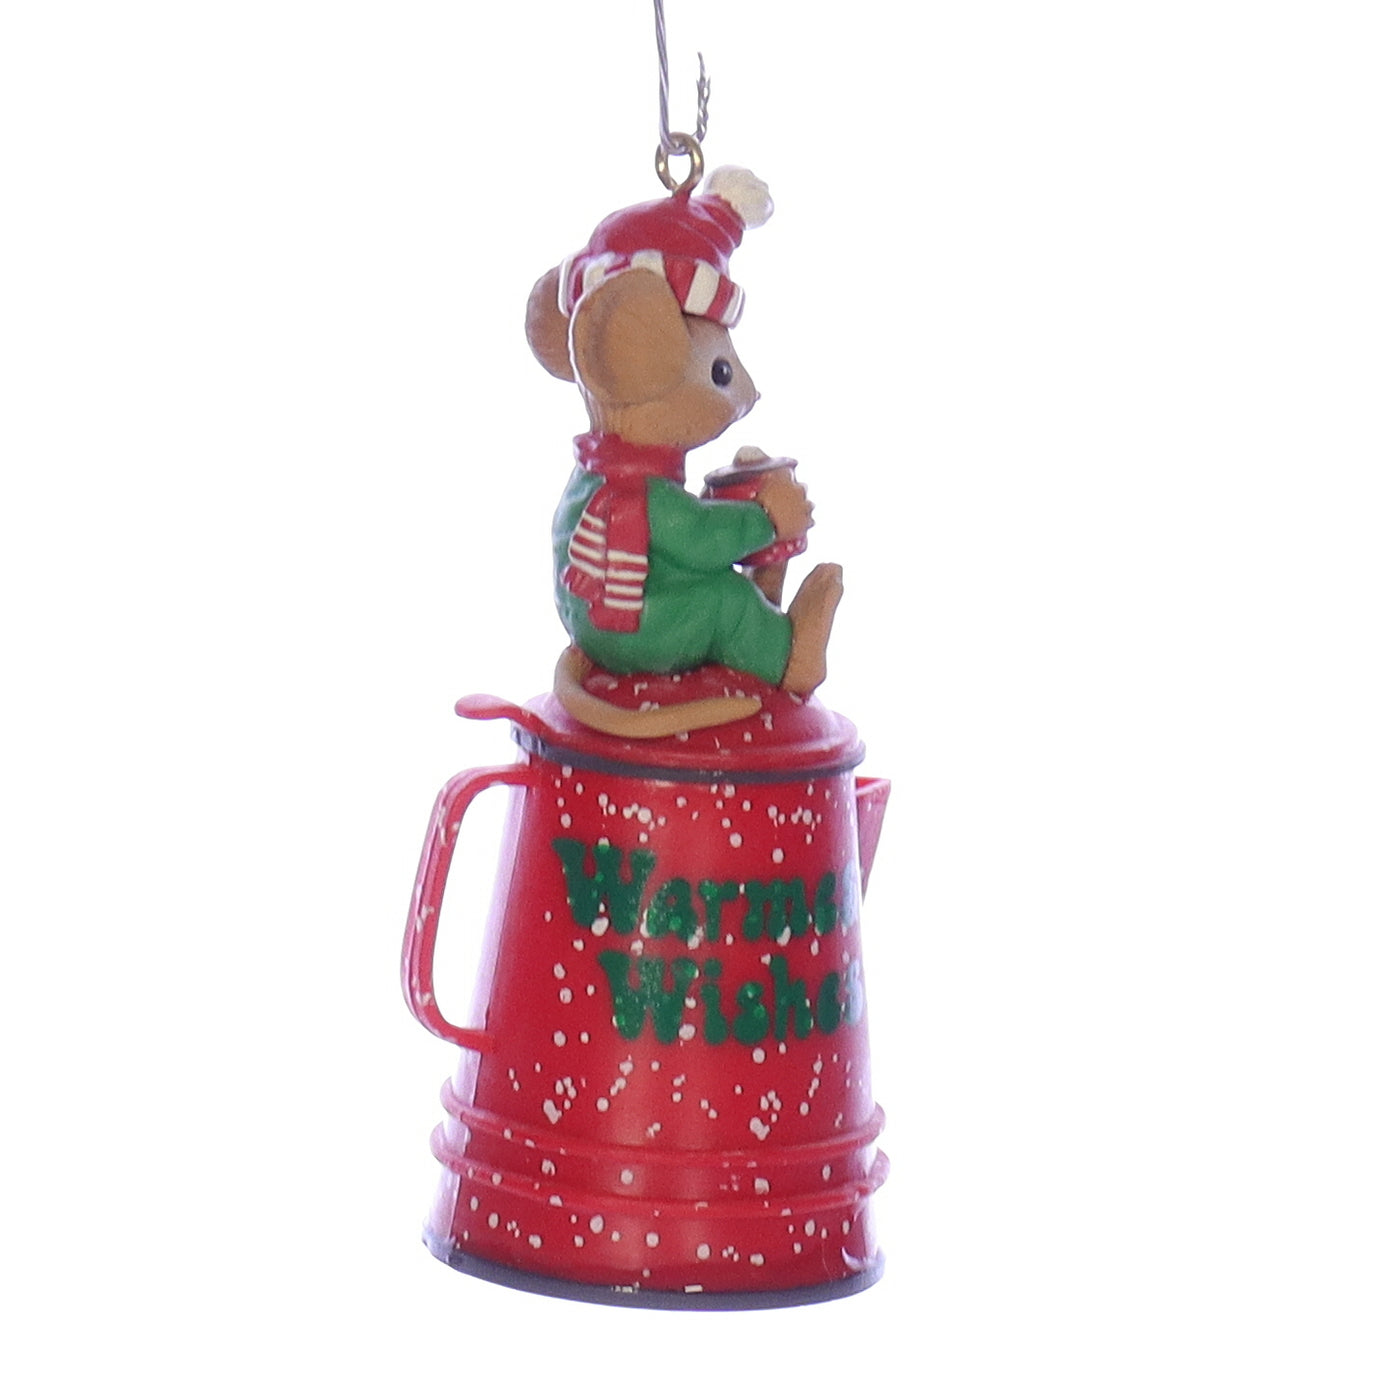 Enesco_Treasury_of_Christmas_Ornaments_564974_Brewing_Warm_Wishes_Mouse_Ornament_1991 Back Right View